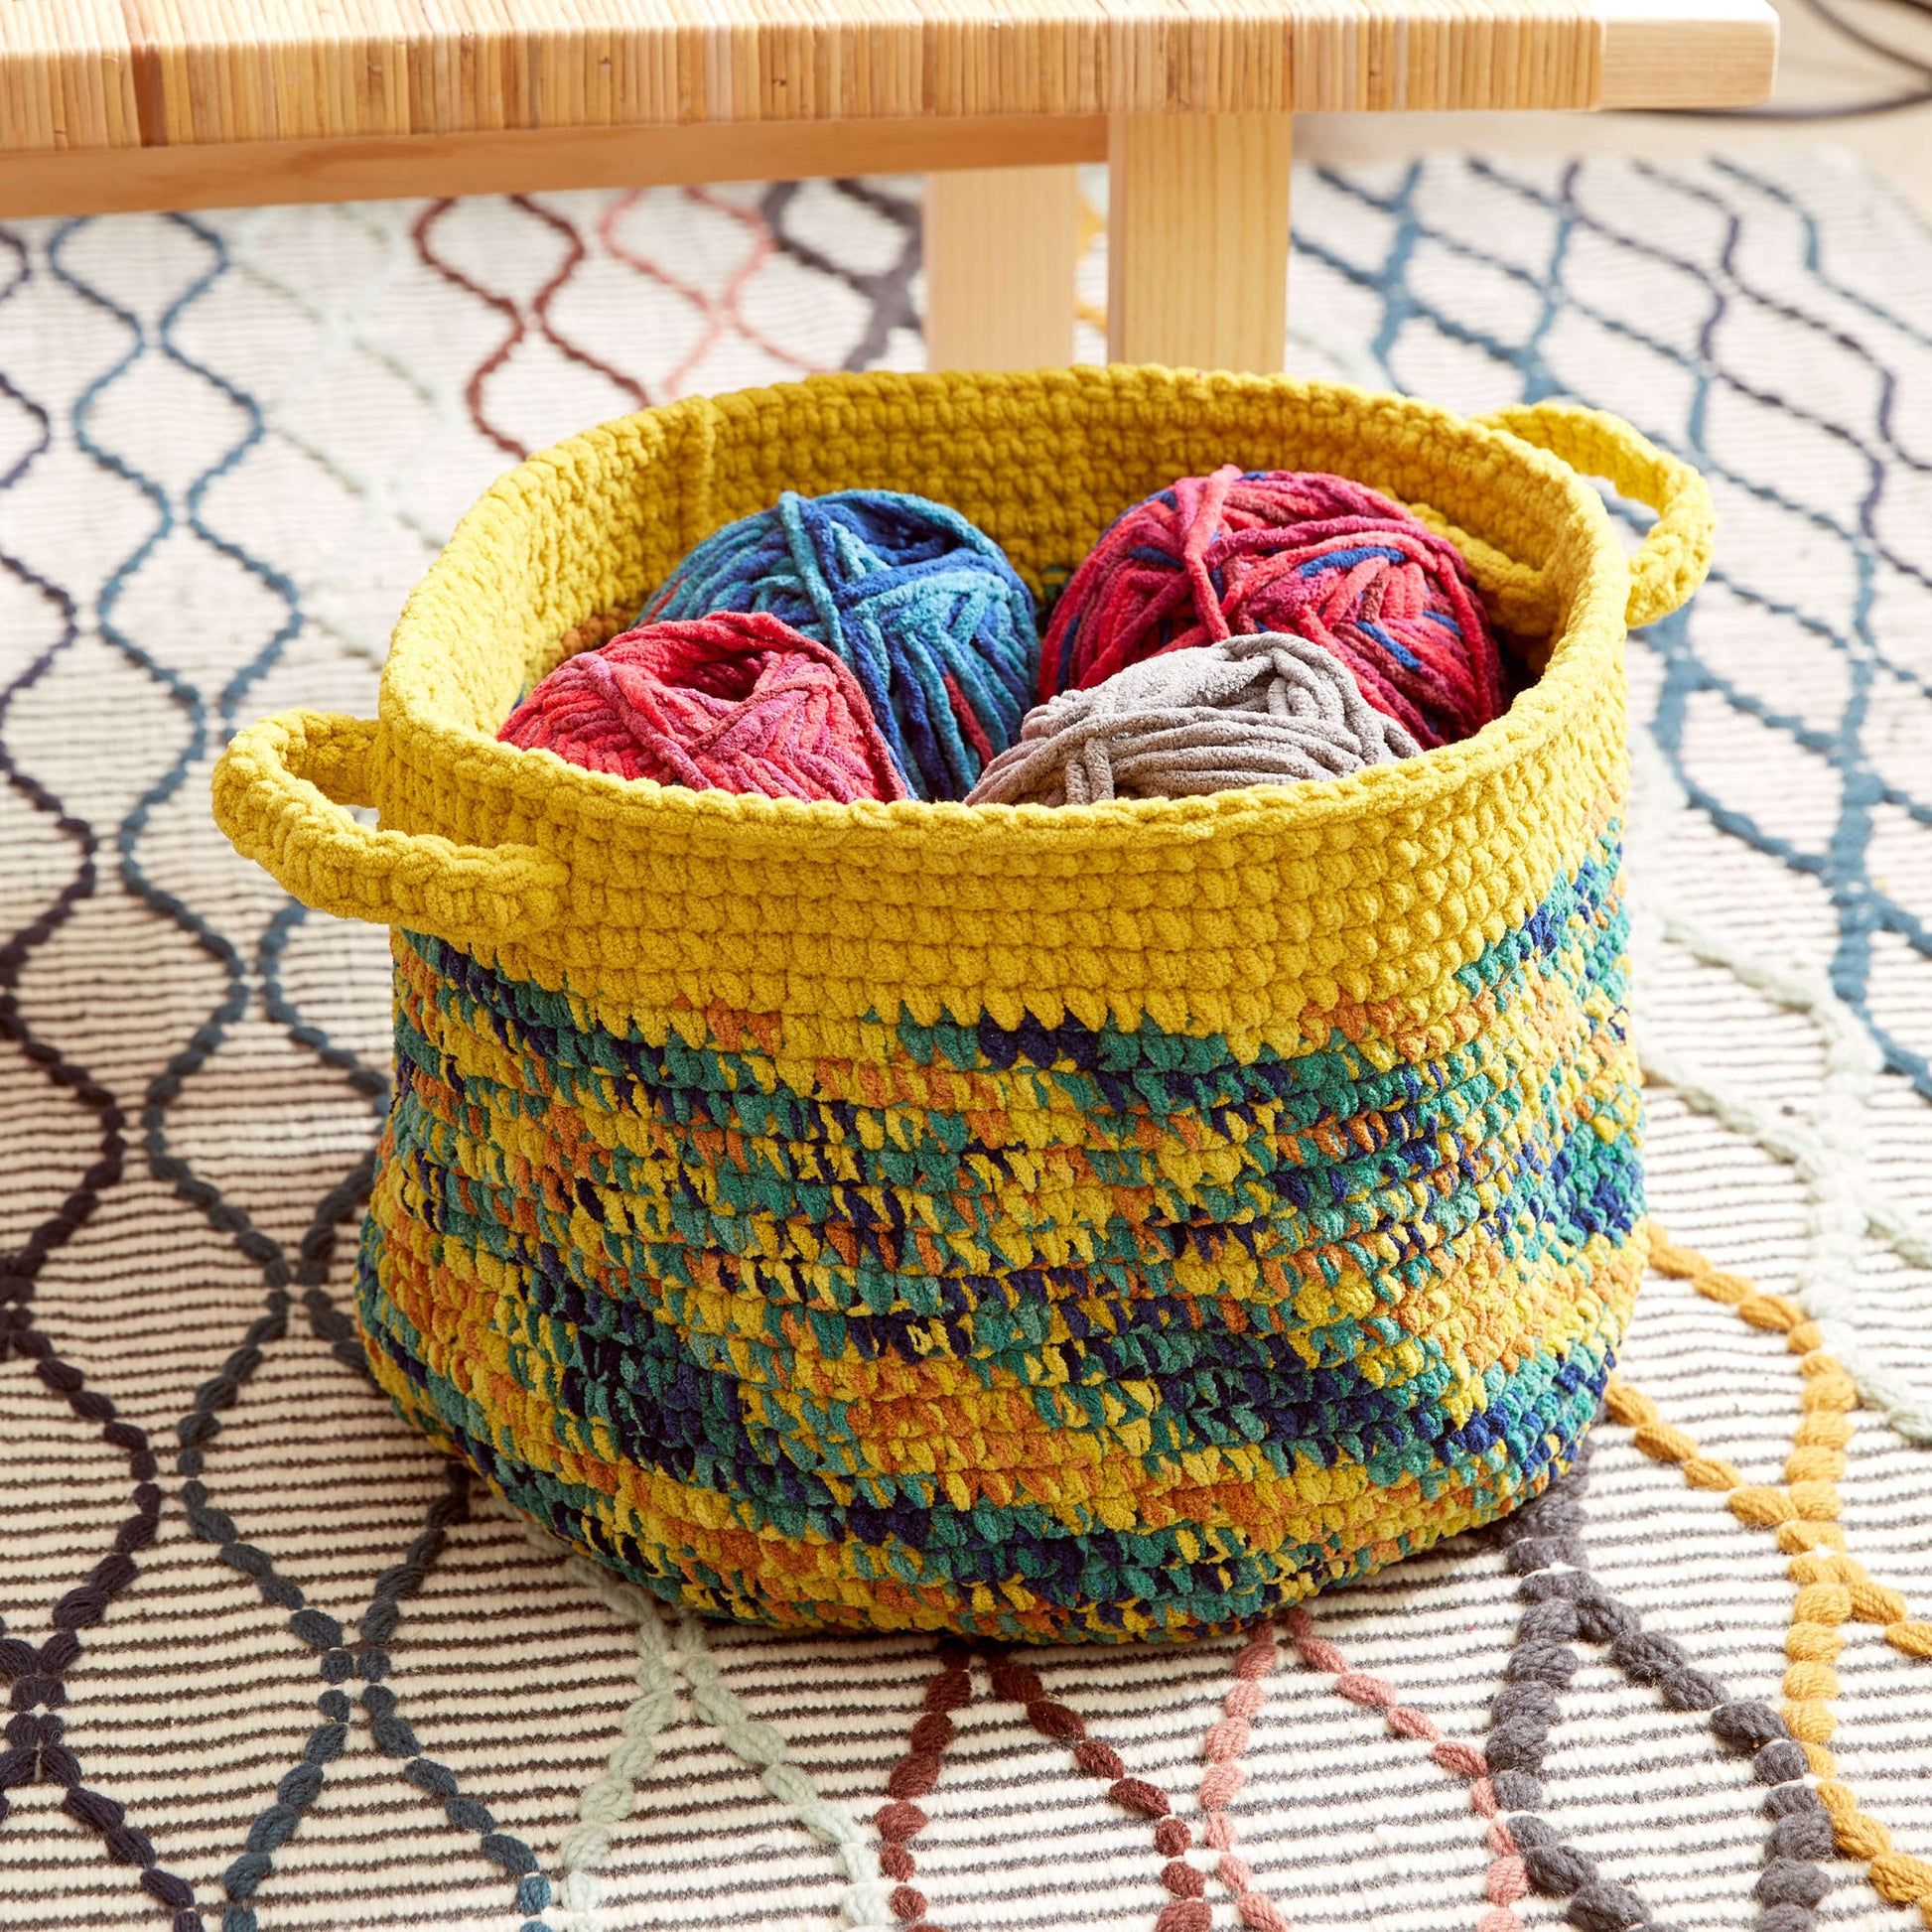 How To Crochet A Variegated Yarn Basket